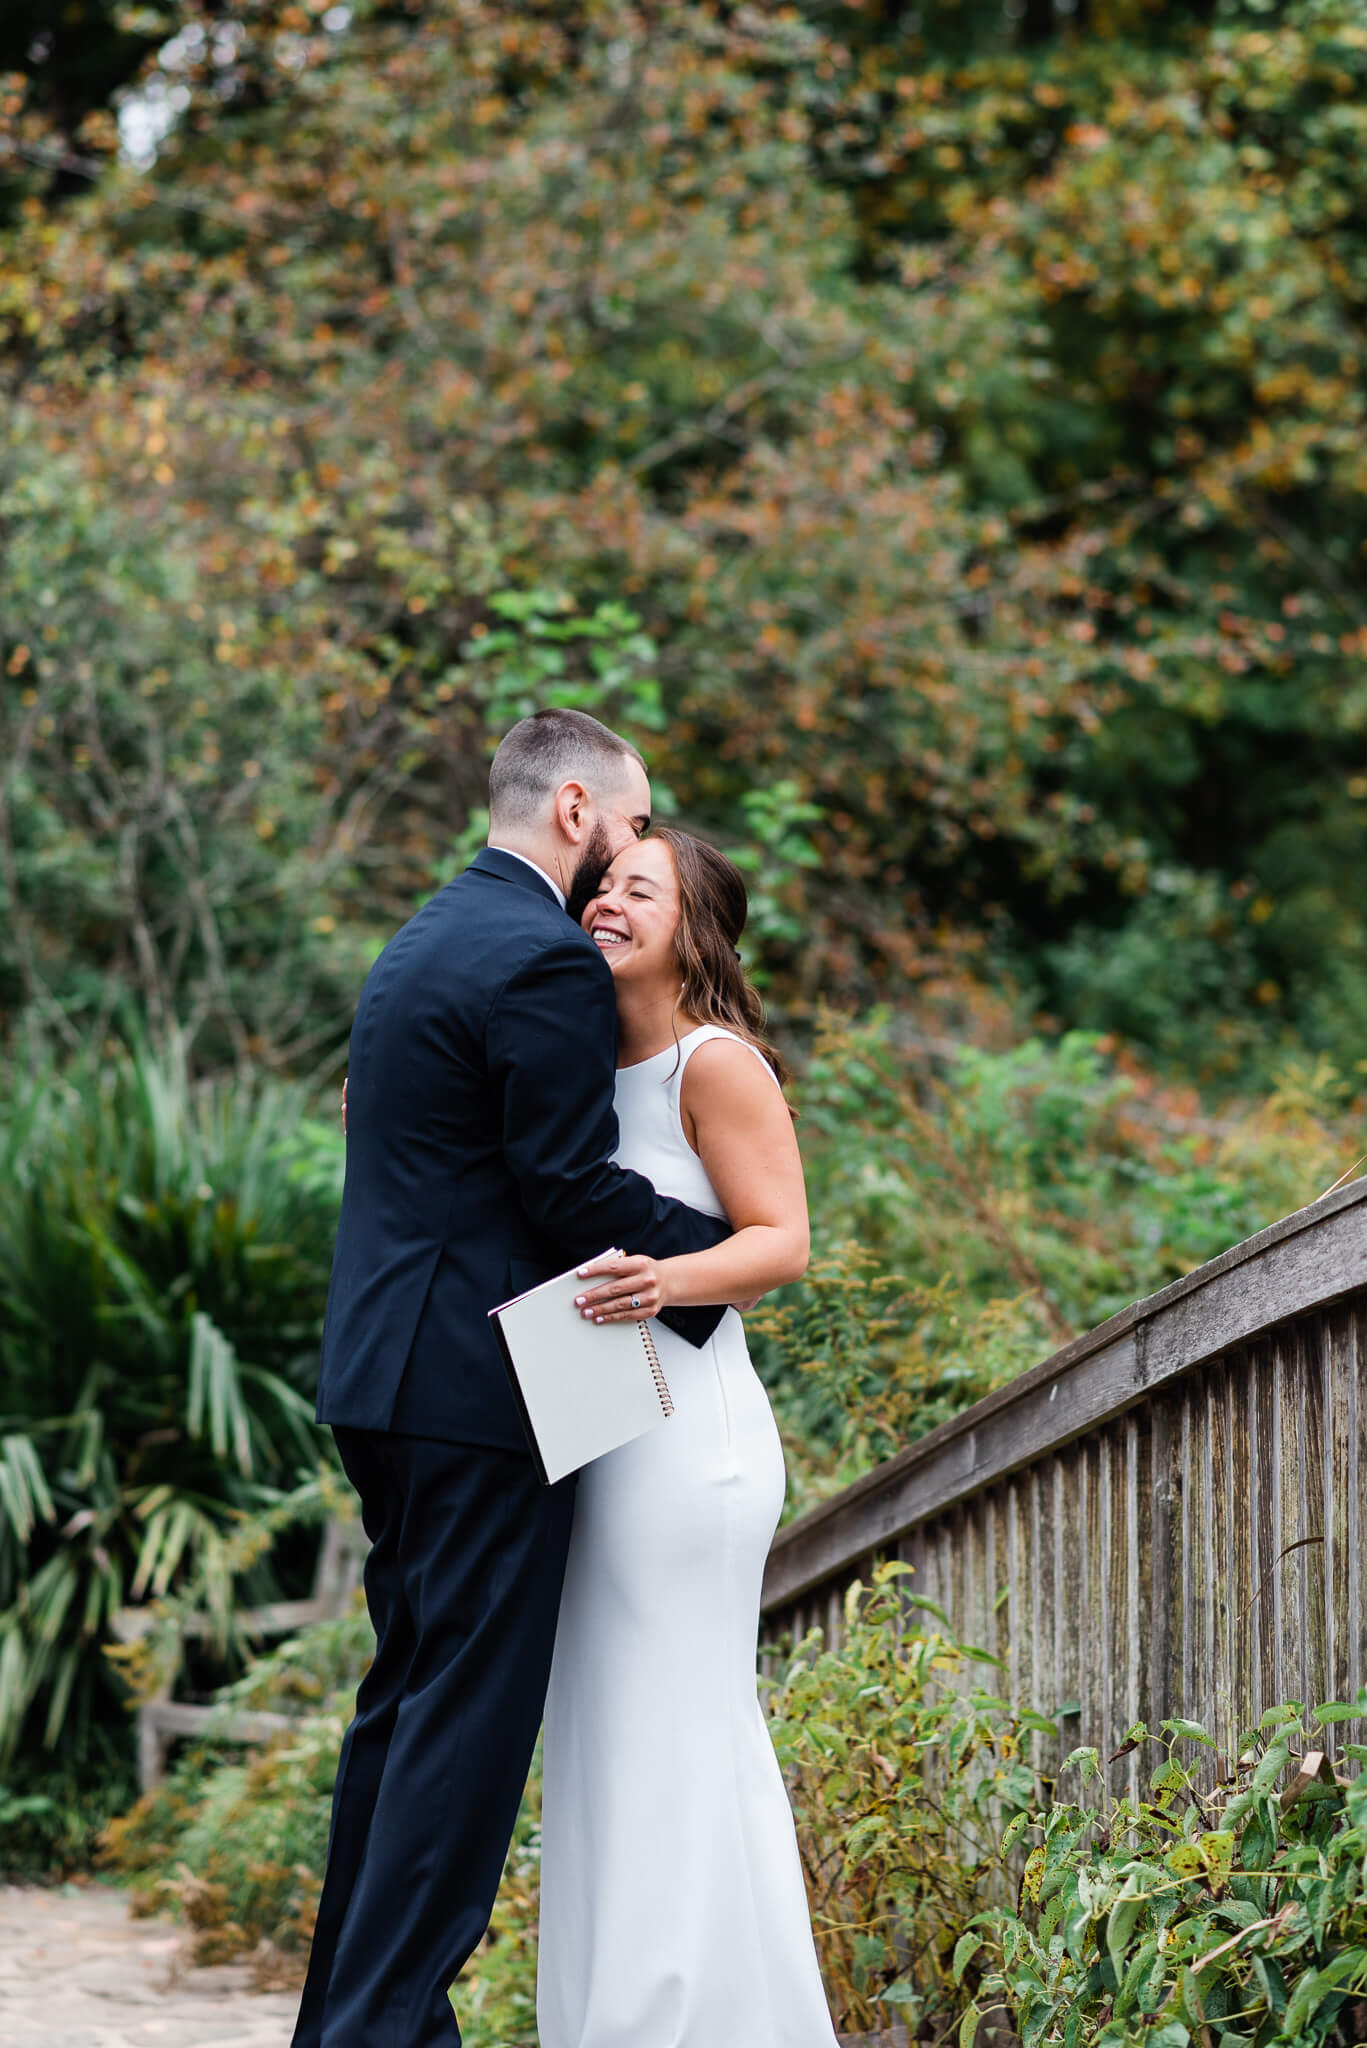 Newlyweds embrace while standing on a wooden bridge in meadowlark botanical gardens after their wedding ceremony